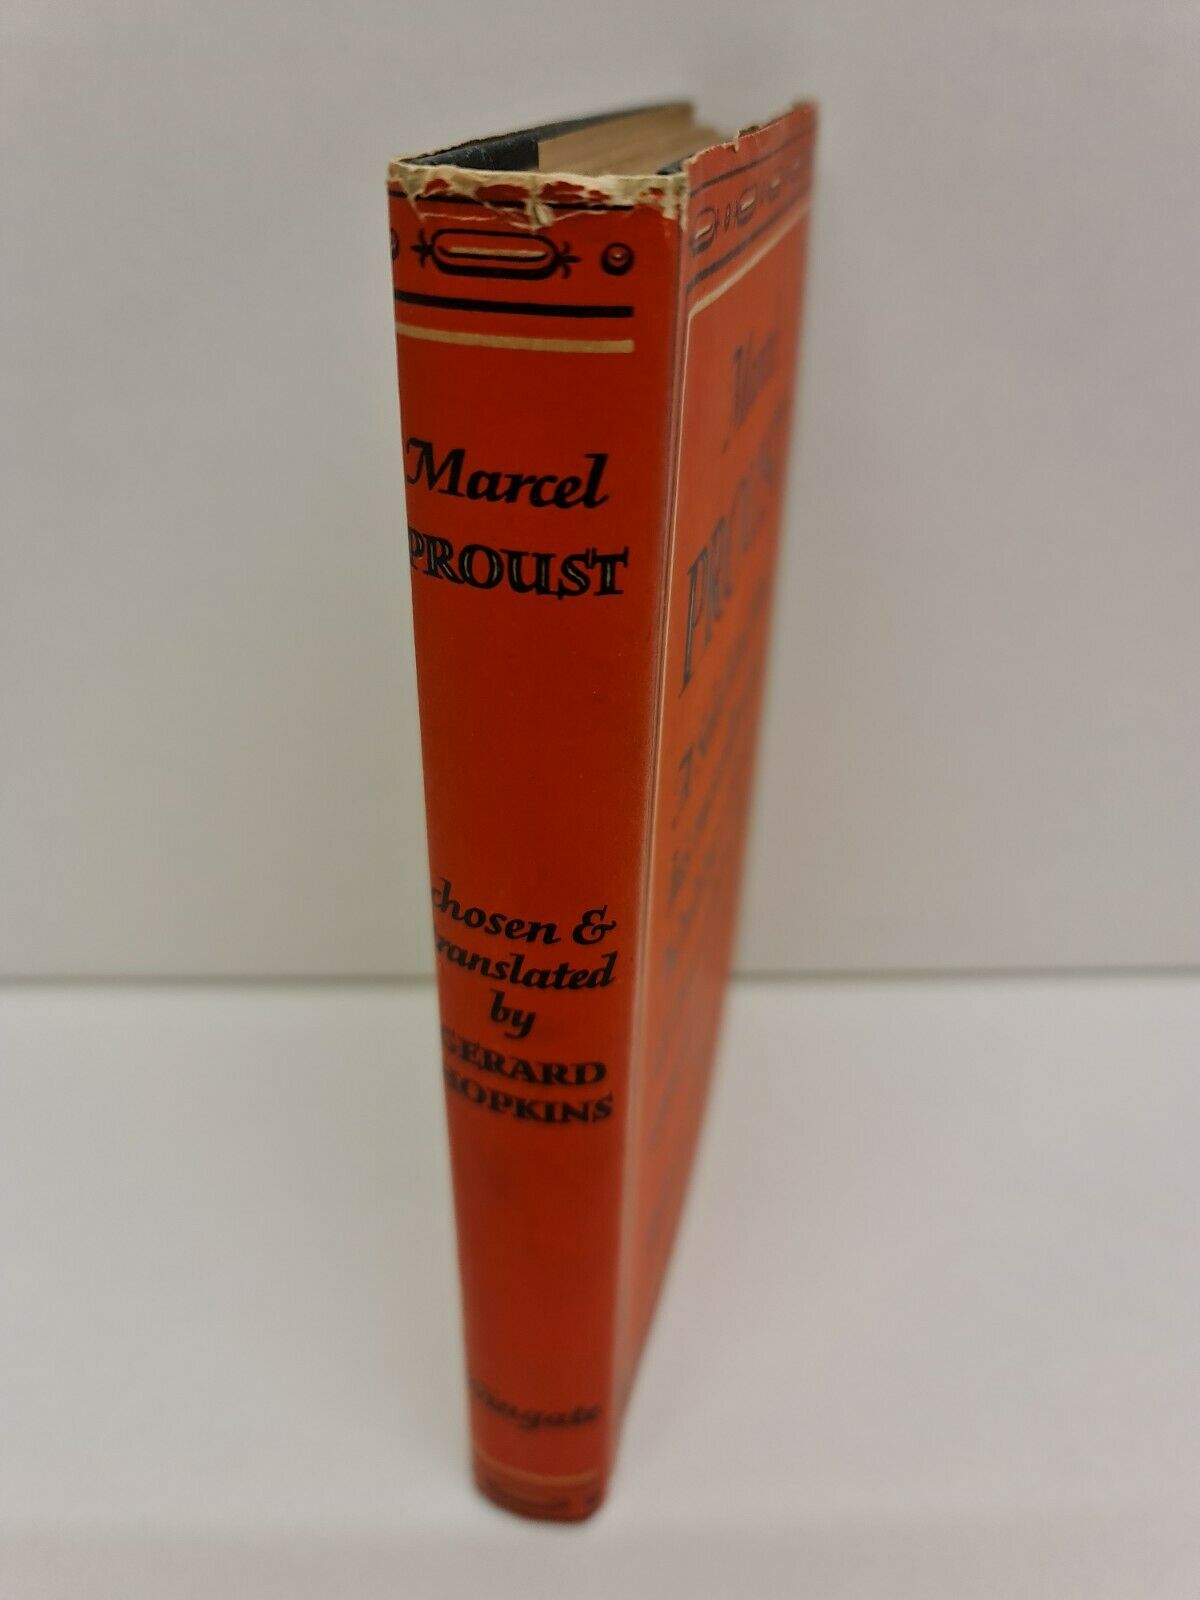 A Selection From His Miscellaneous Writings by Marcel Proust (1948)